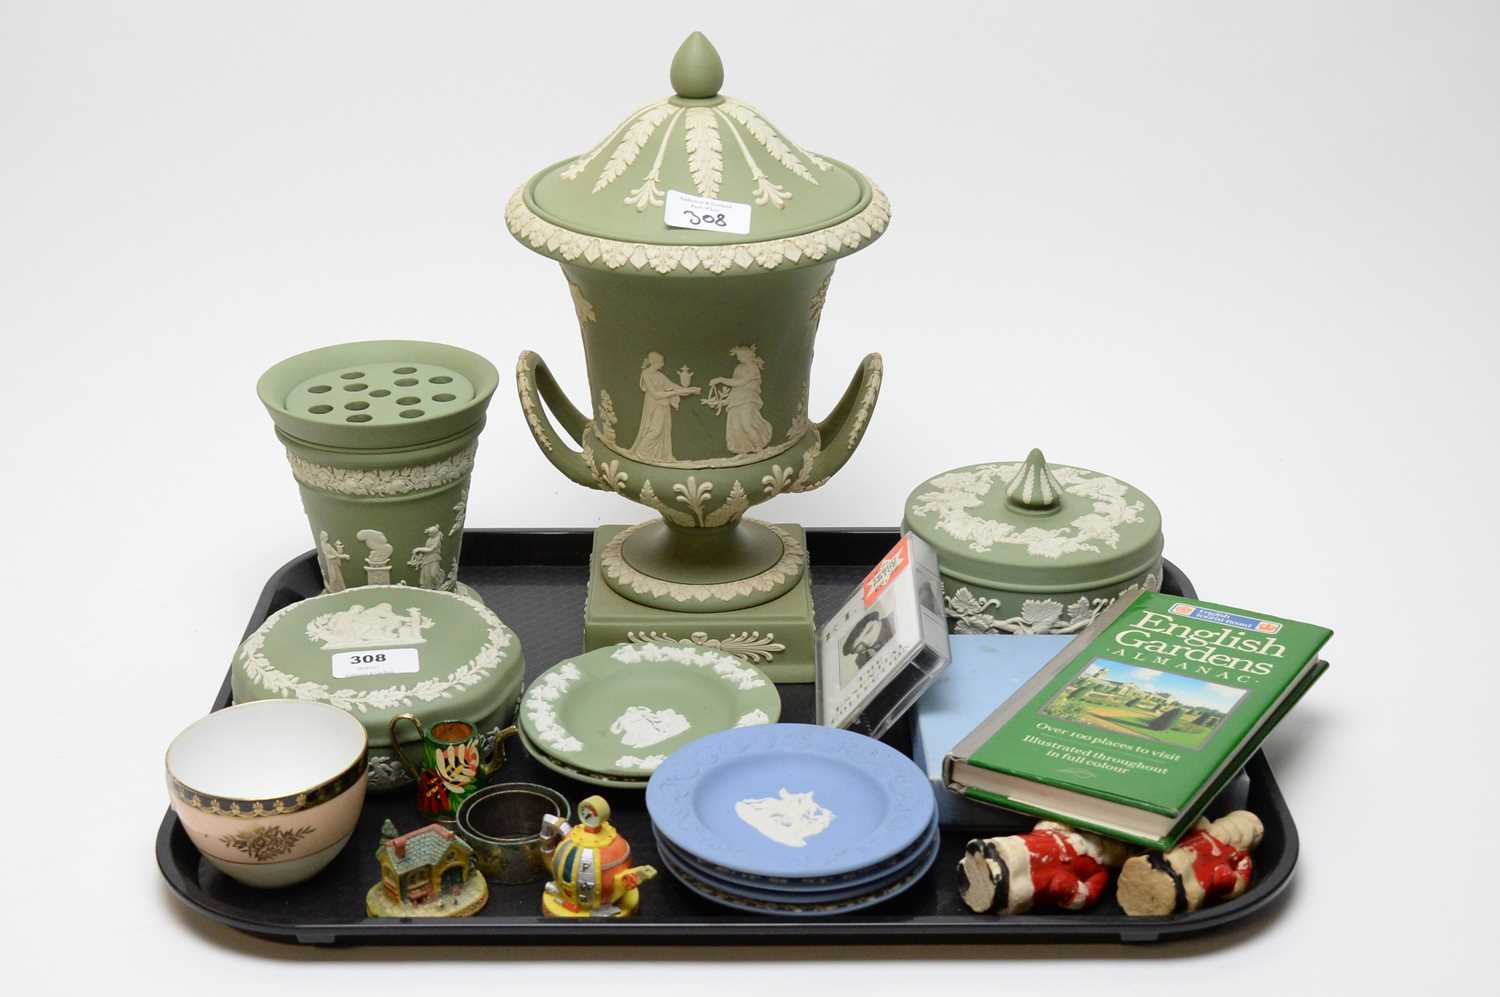 Lot 308 - A collection of 20th Century green and blue Wedgwood jasper ware